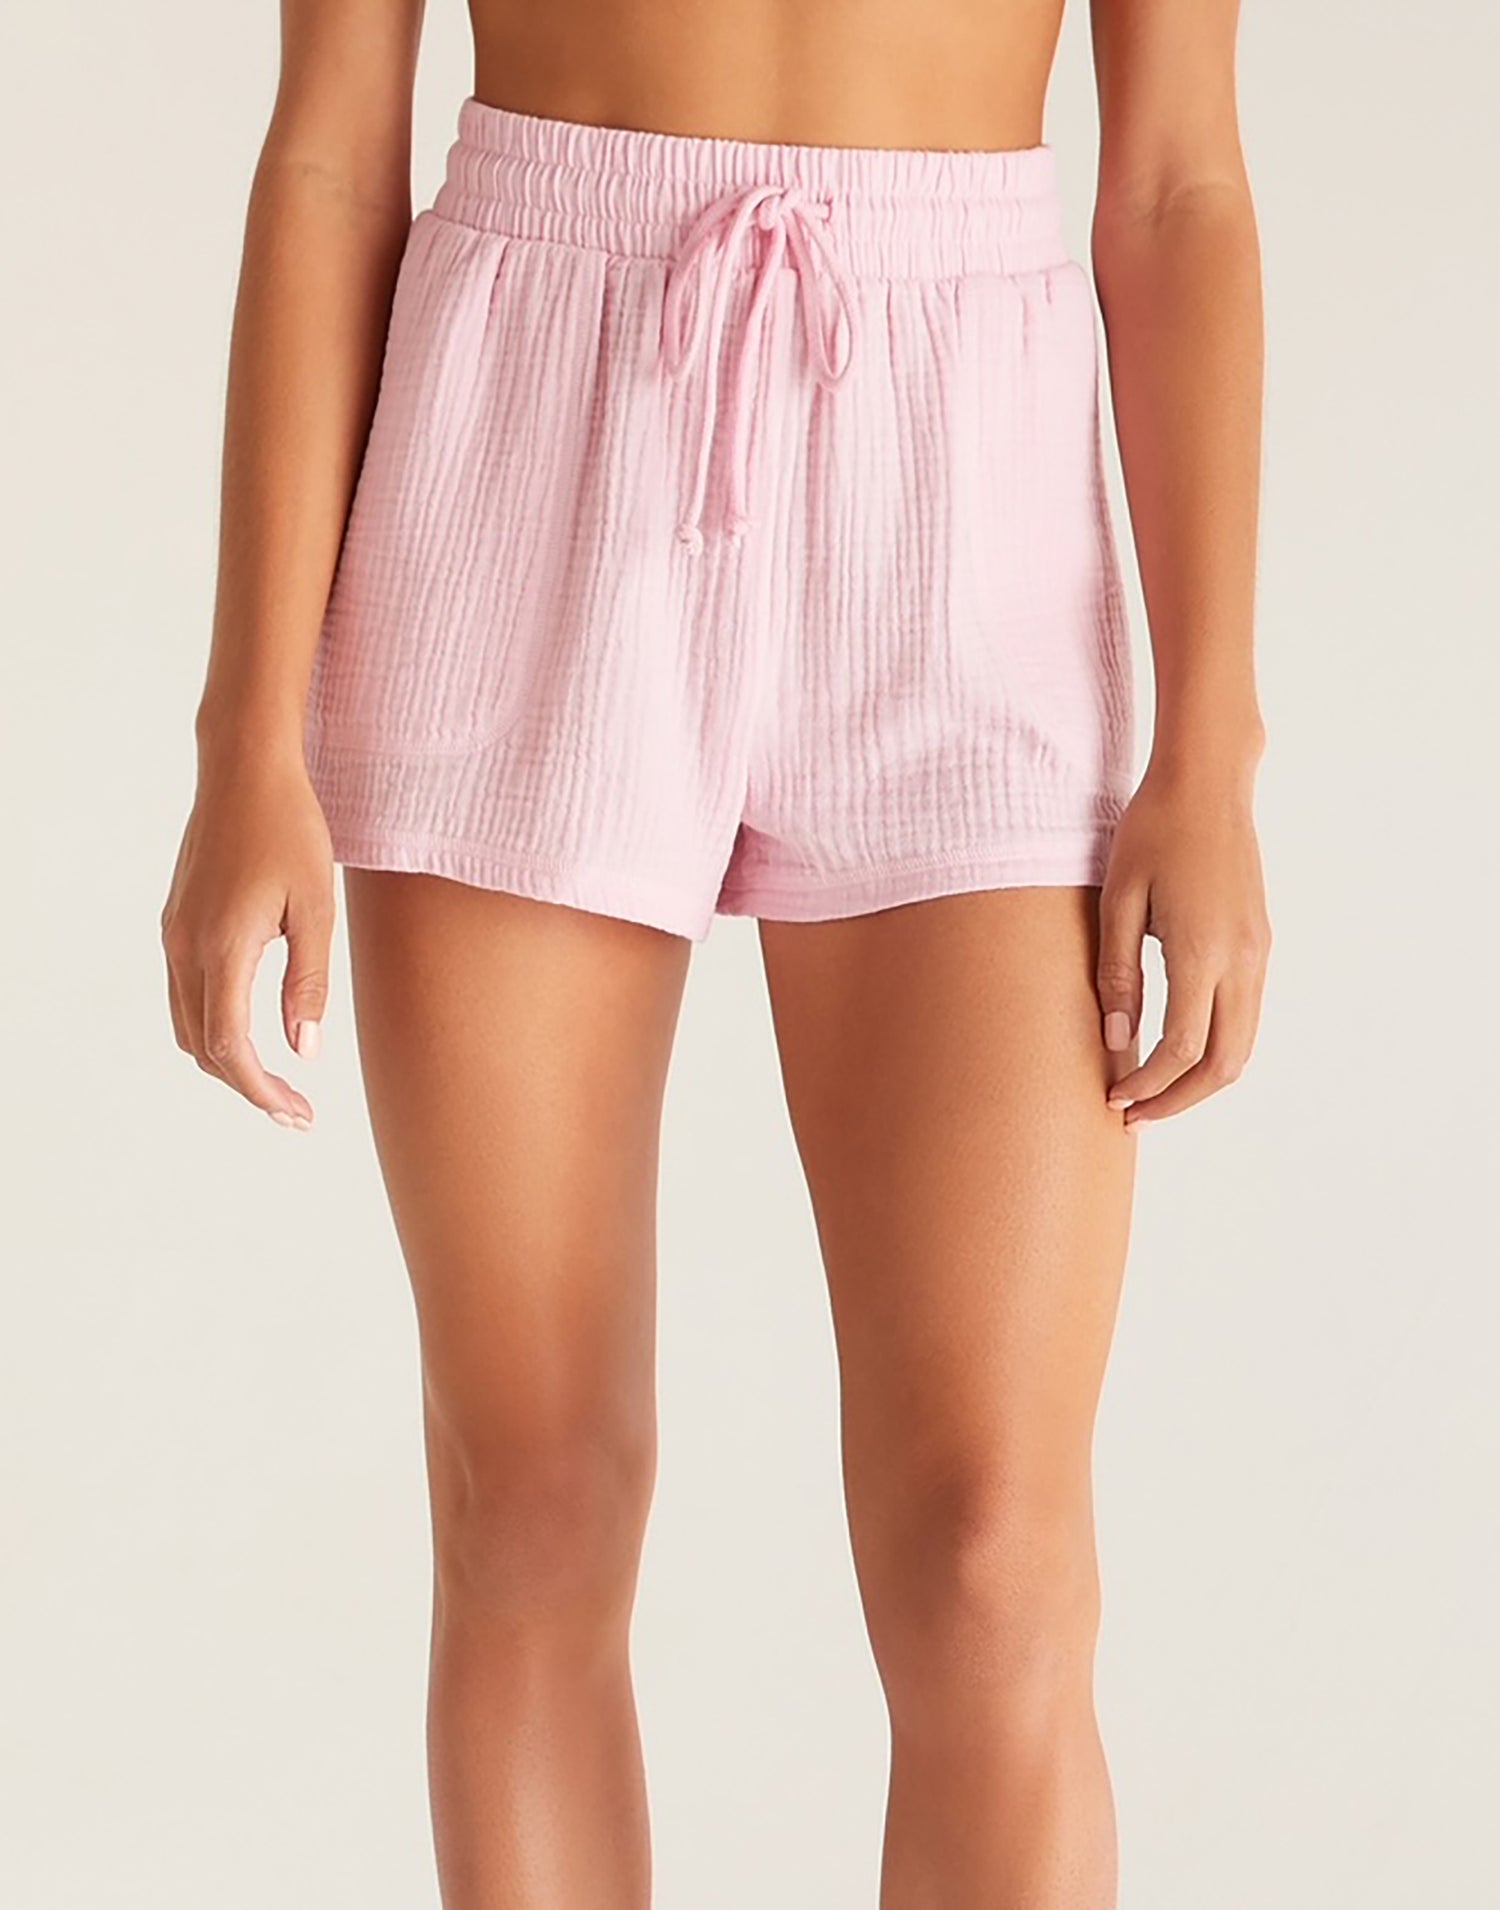 Sunny Gauze Short by Z Supply in Pink Orchid - Front View